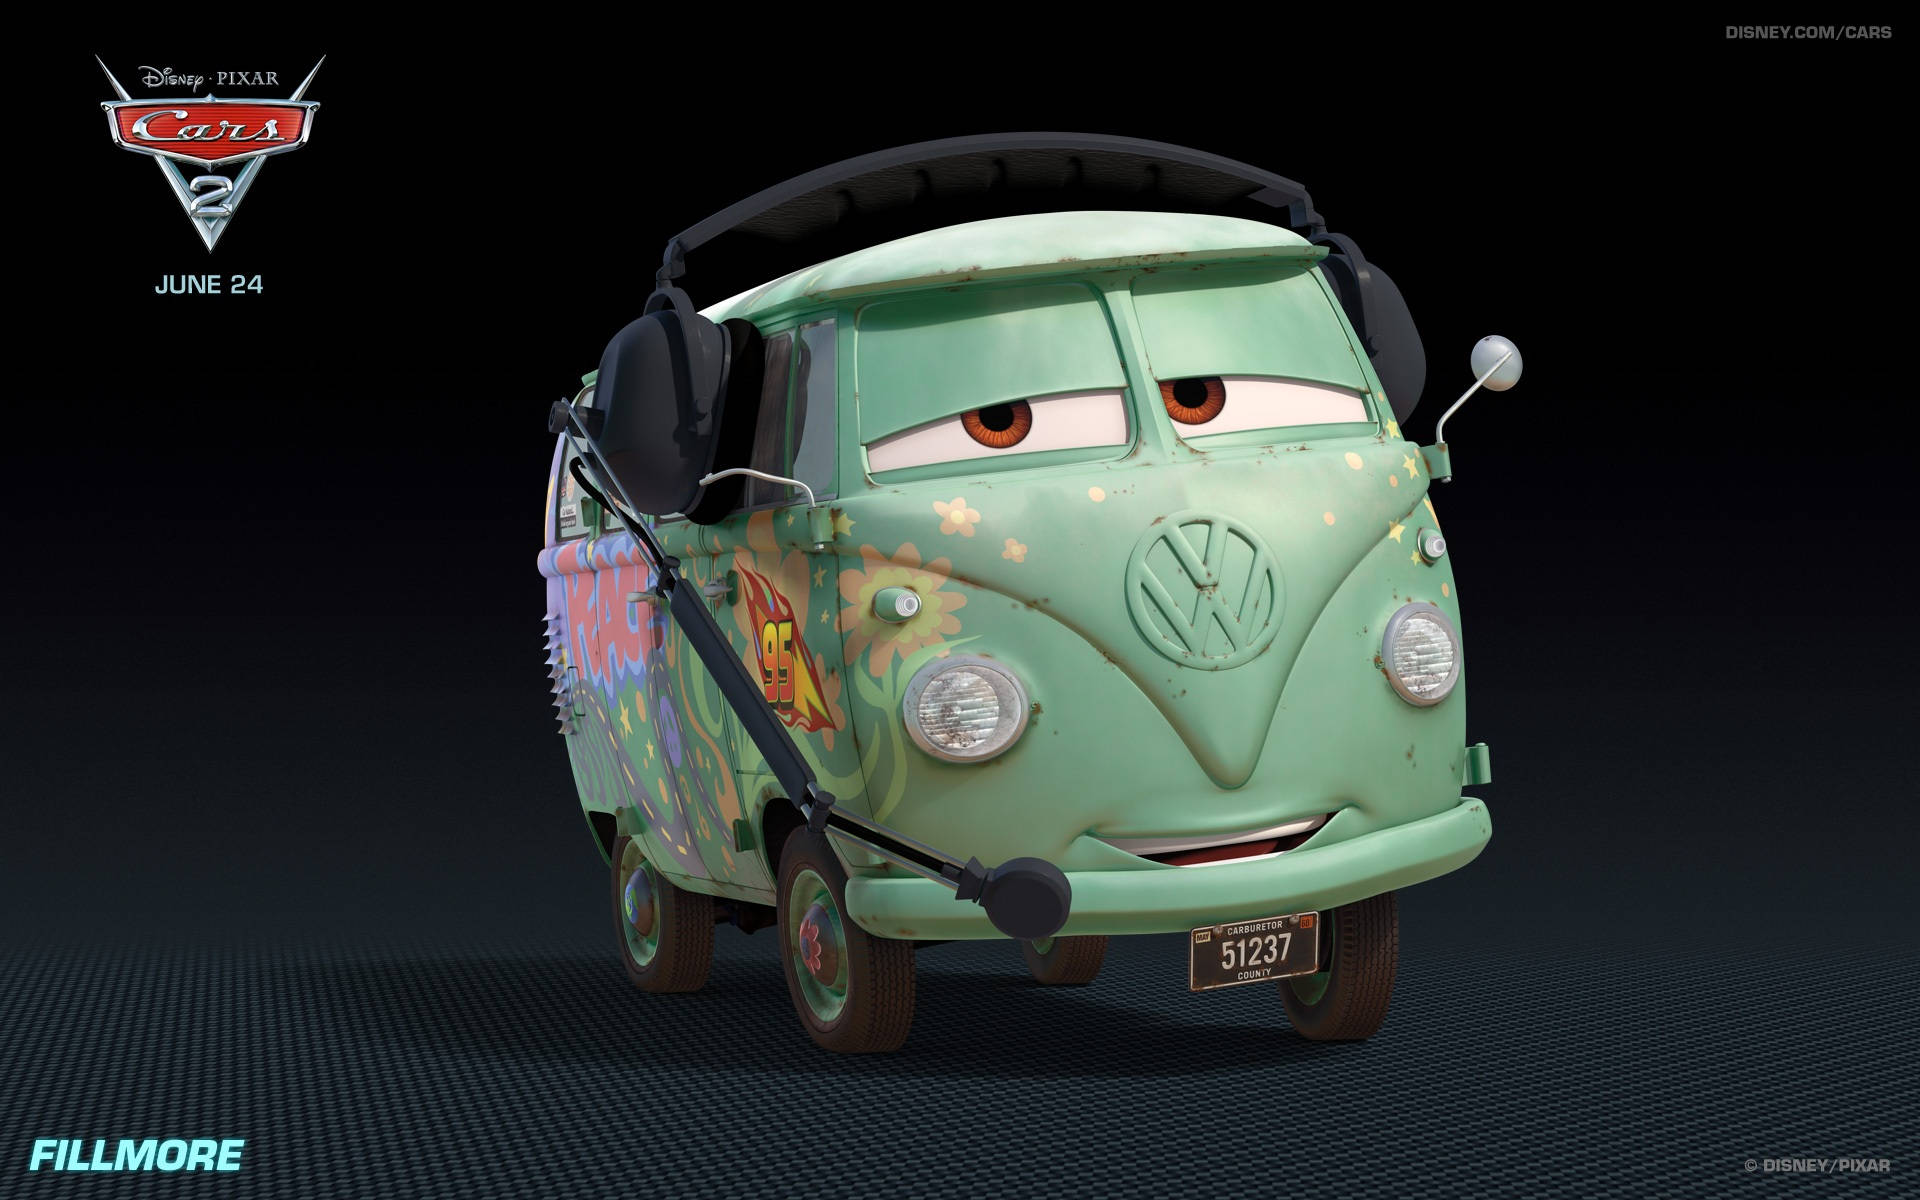 Pixar's Introspective Companion, Fillmore From Cars 2 Background